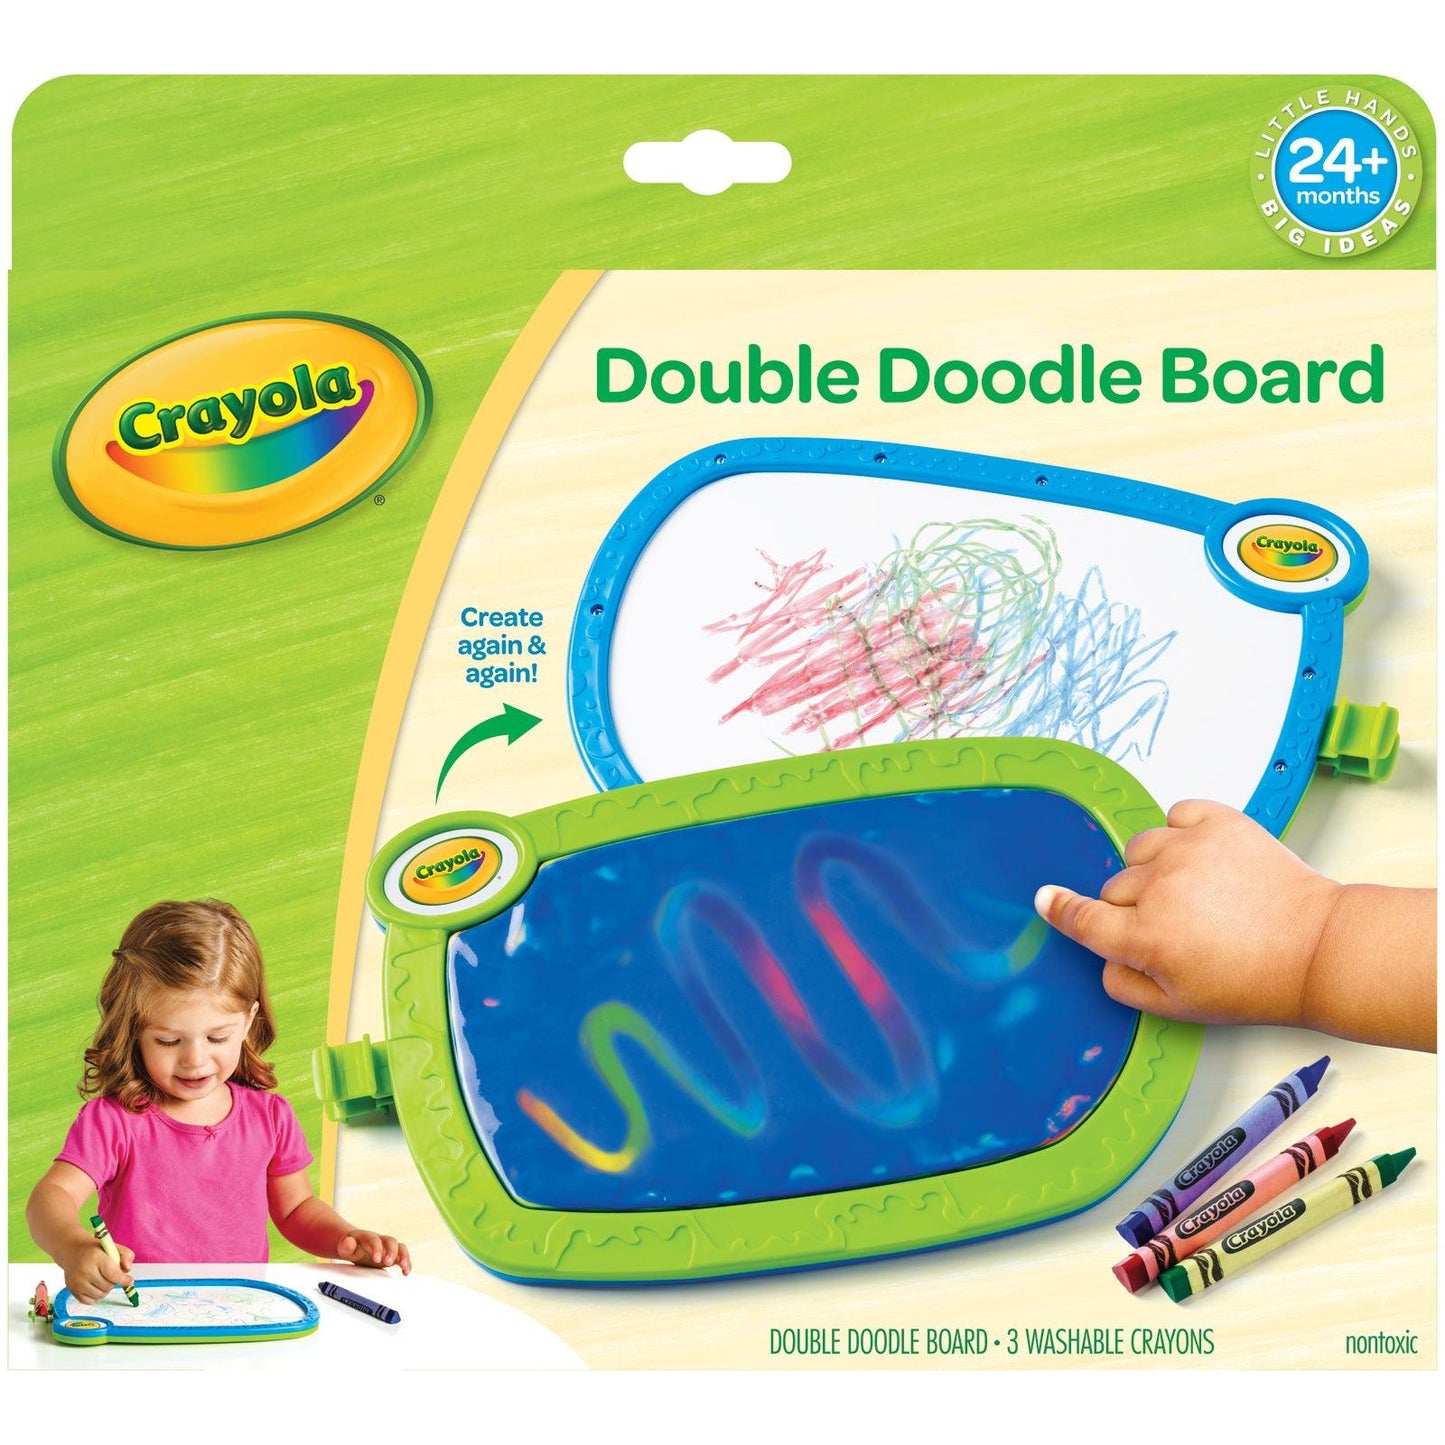 My First Double Doodle Board - Loomini